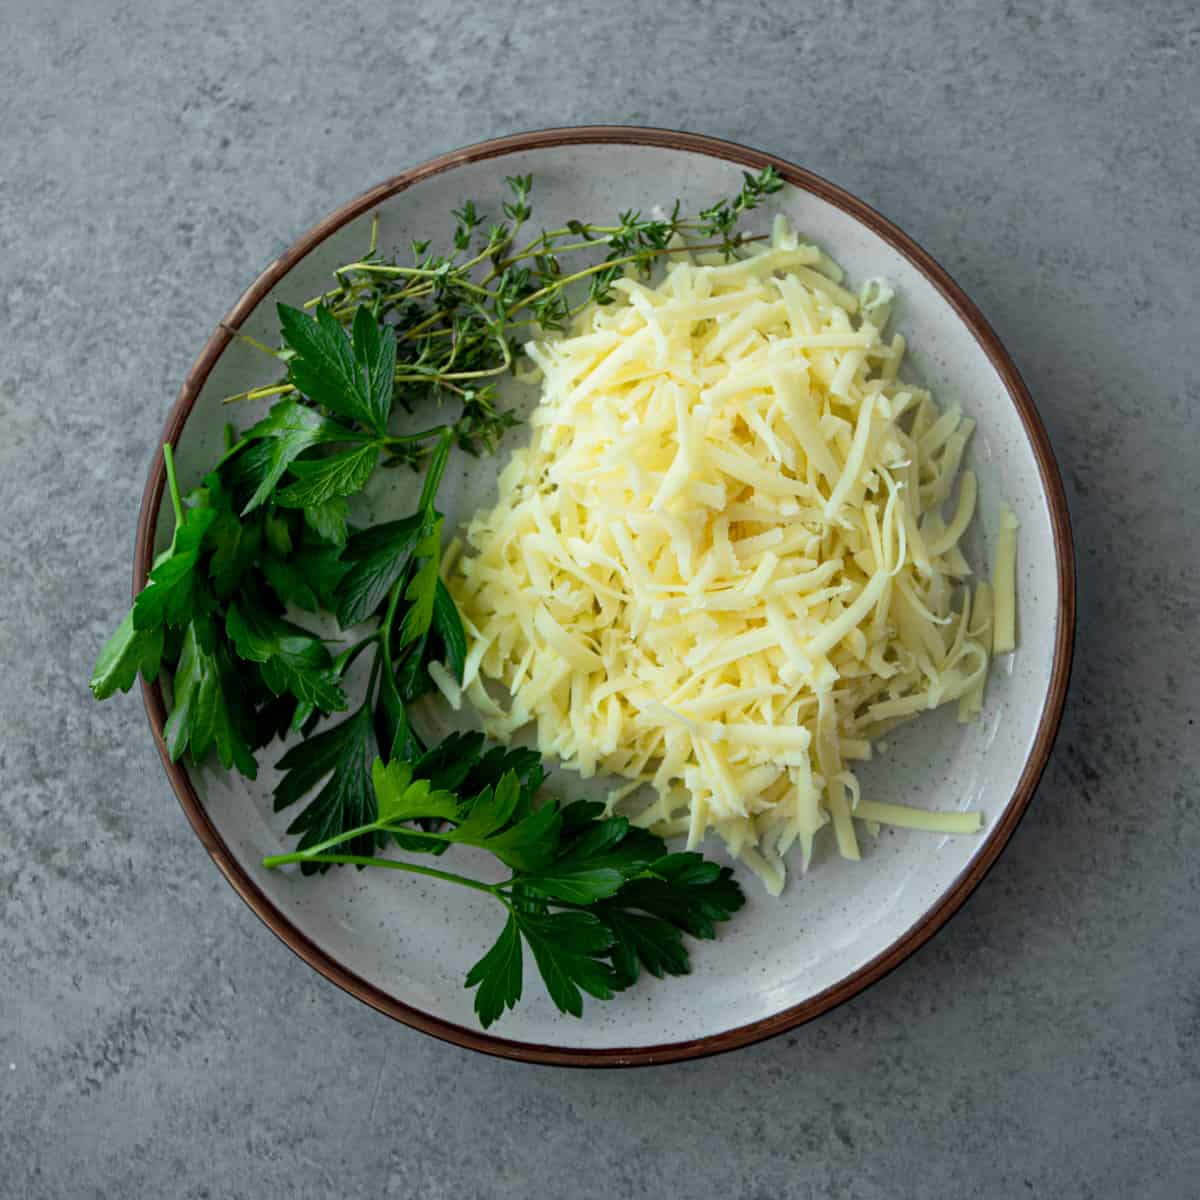 herbs and shredded cheese on a white plate